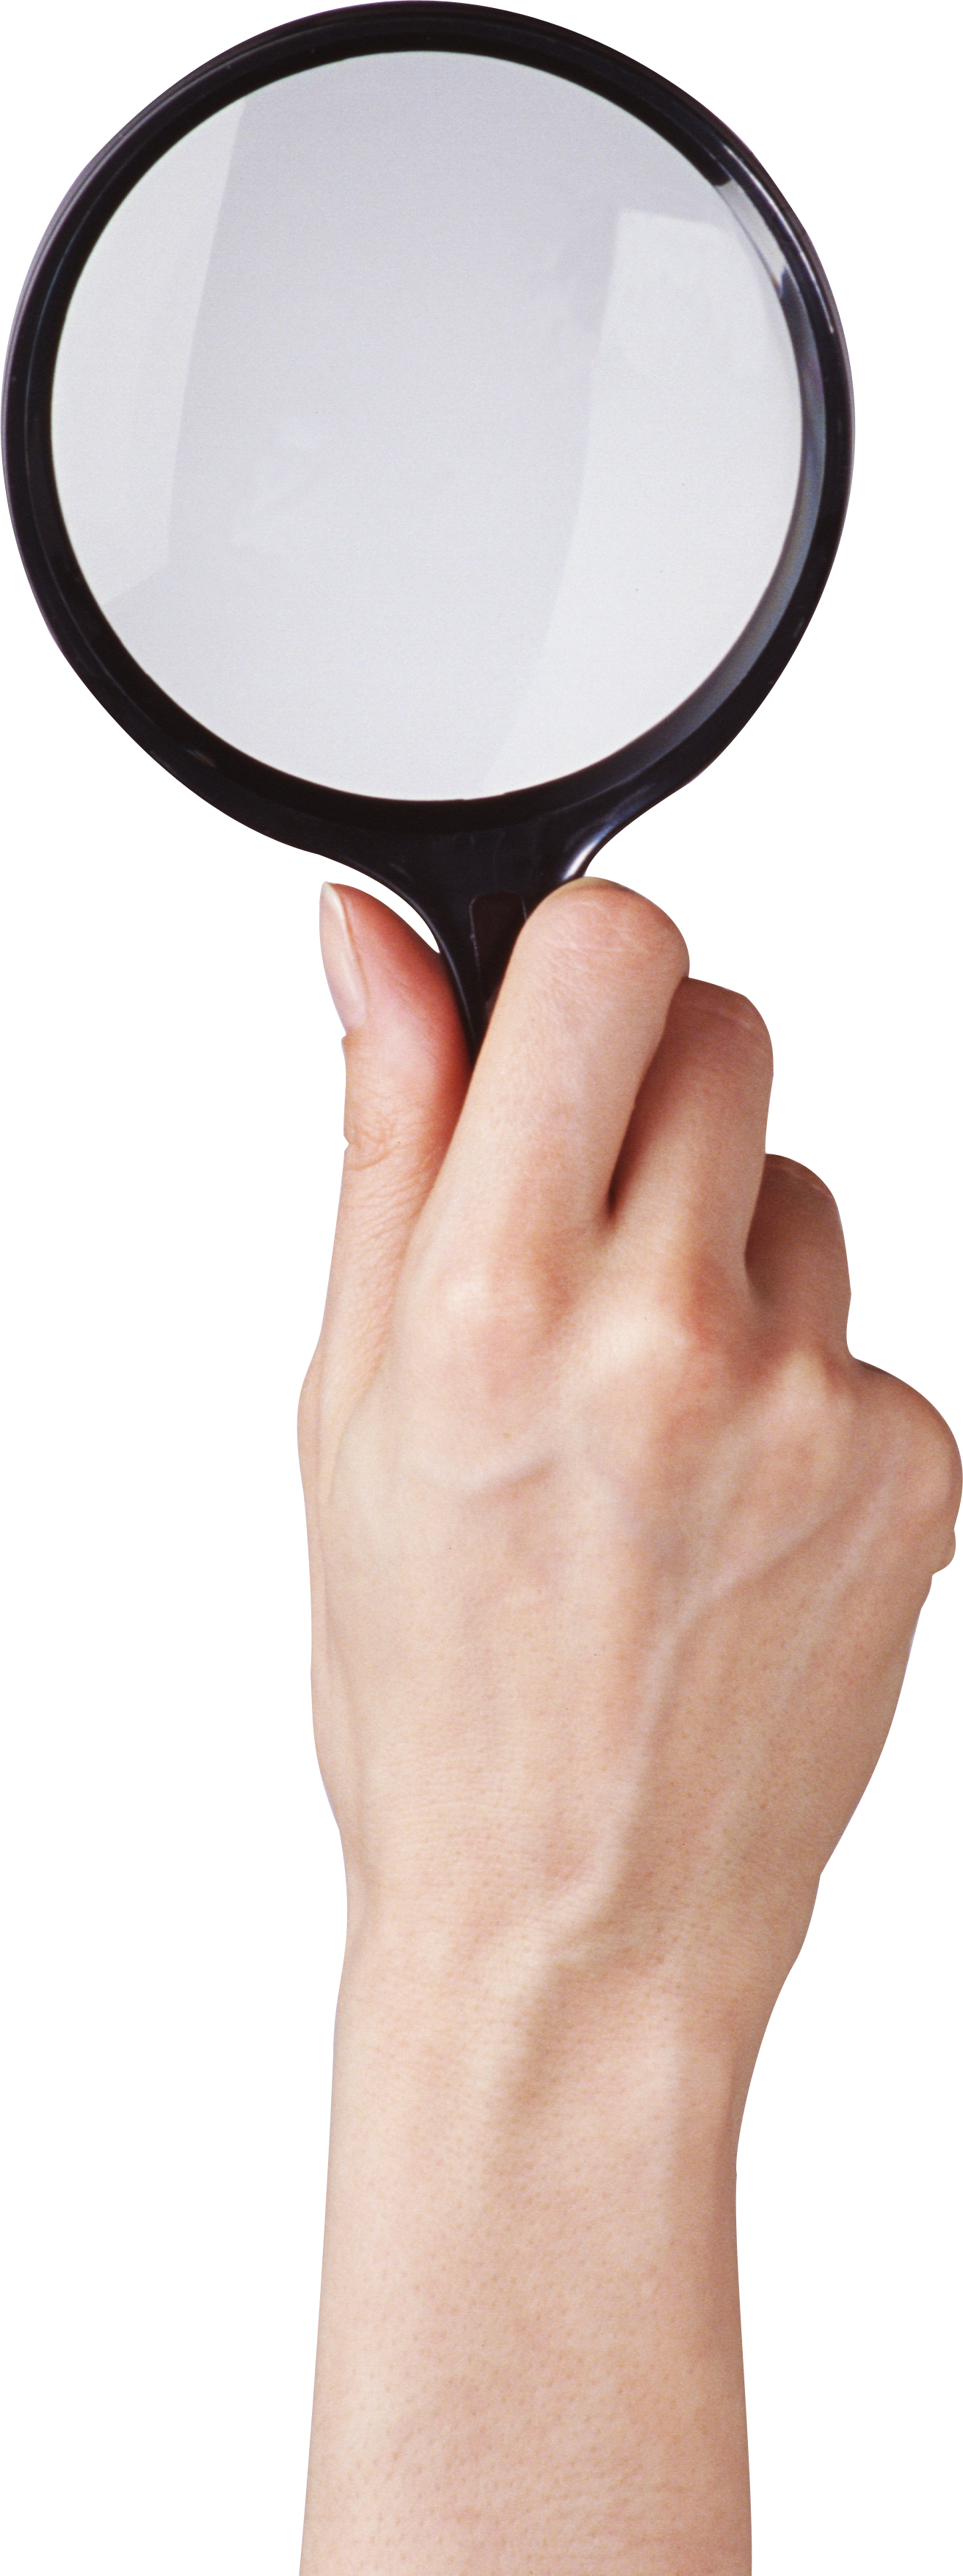 Loupe in hand PNG image transparent image download, size: 1312x3508px